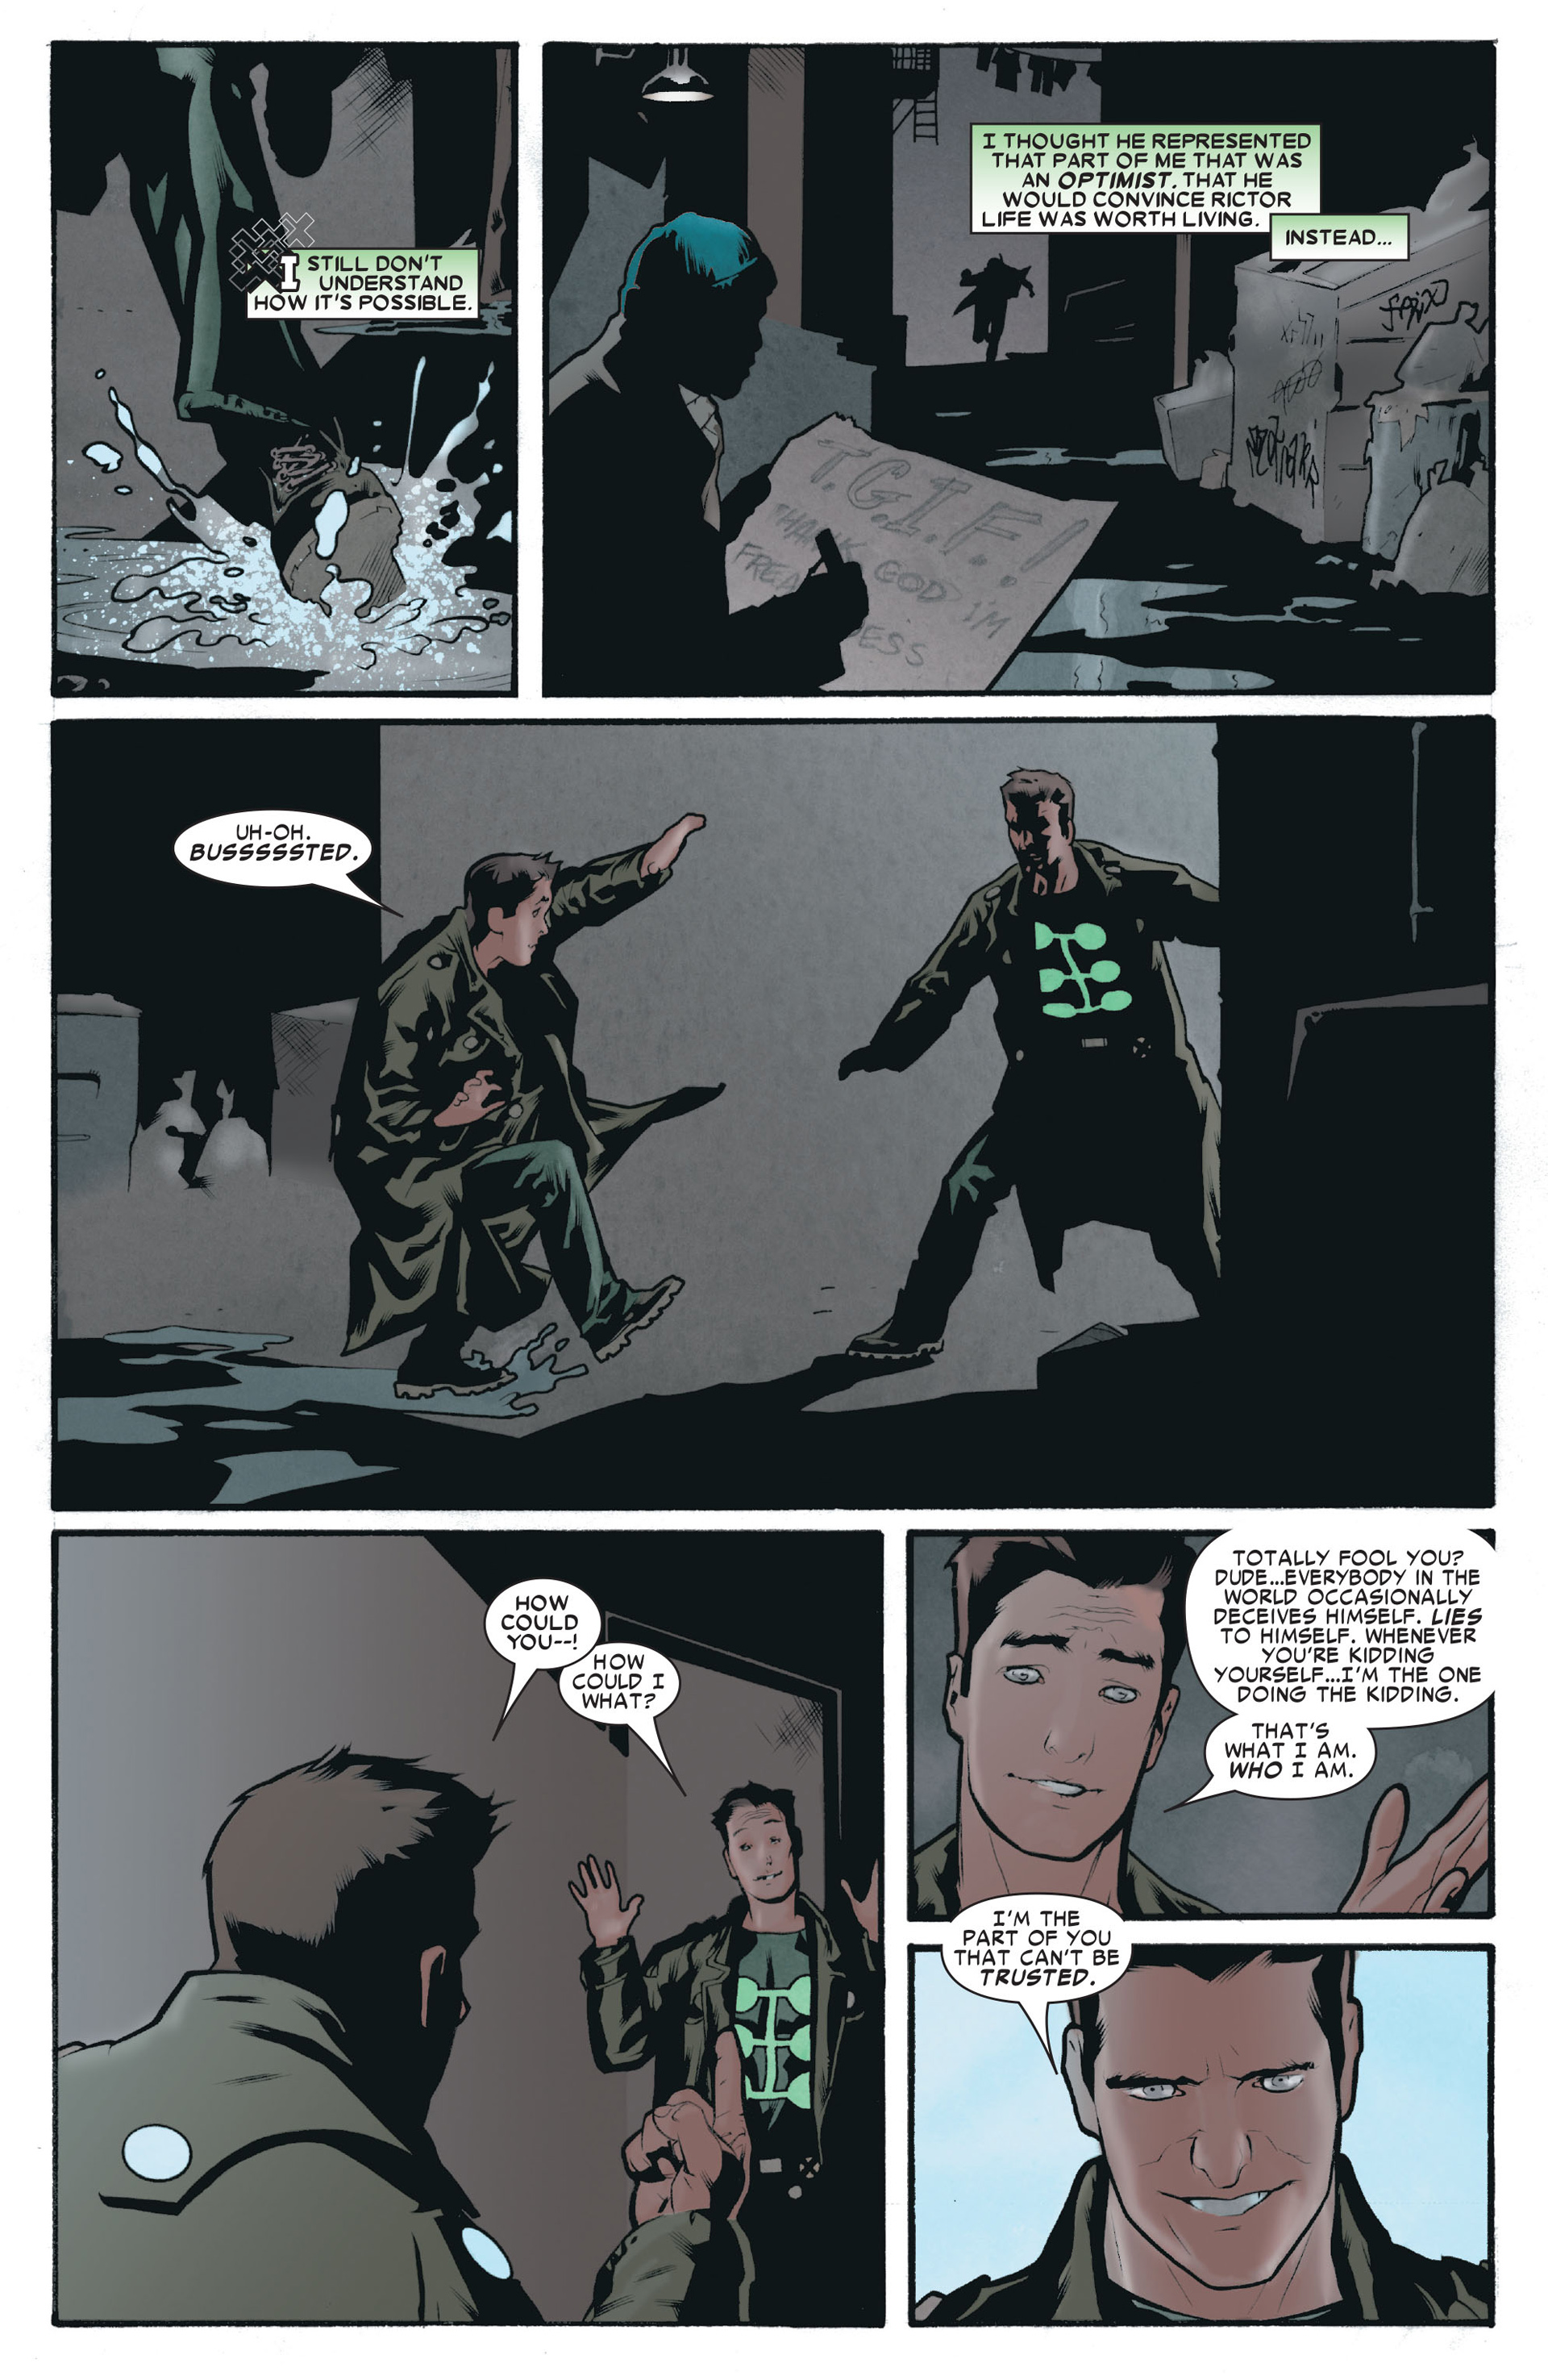 X-Factor (2006) 2 Page 7